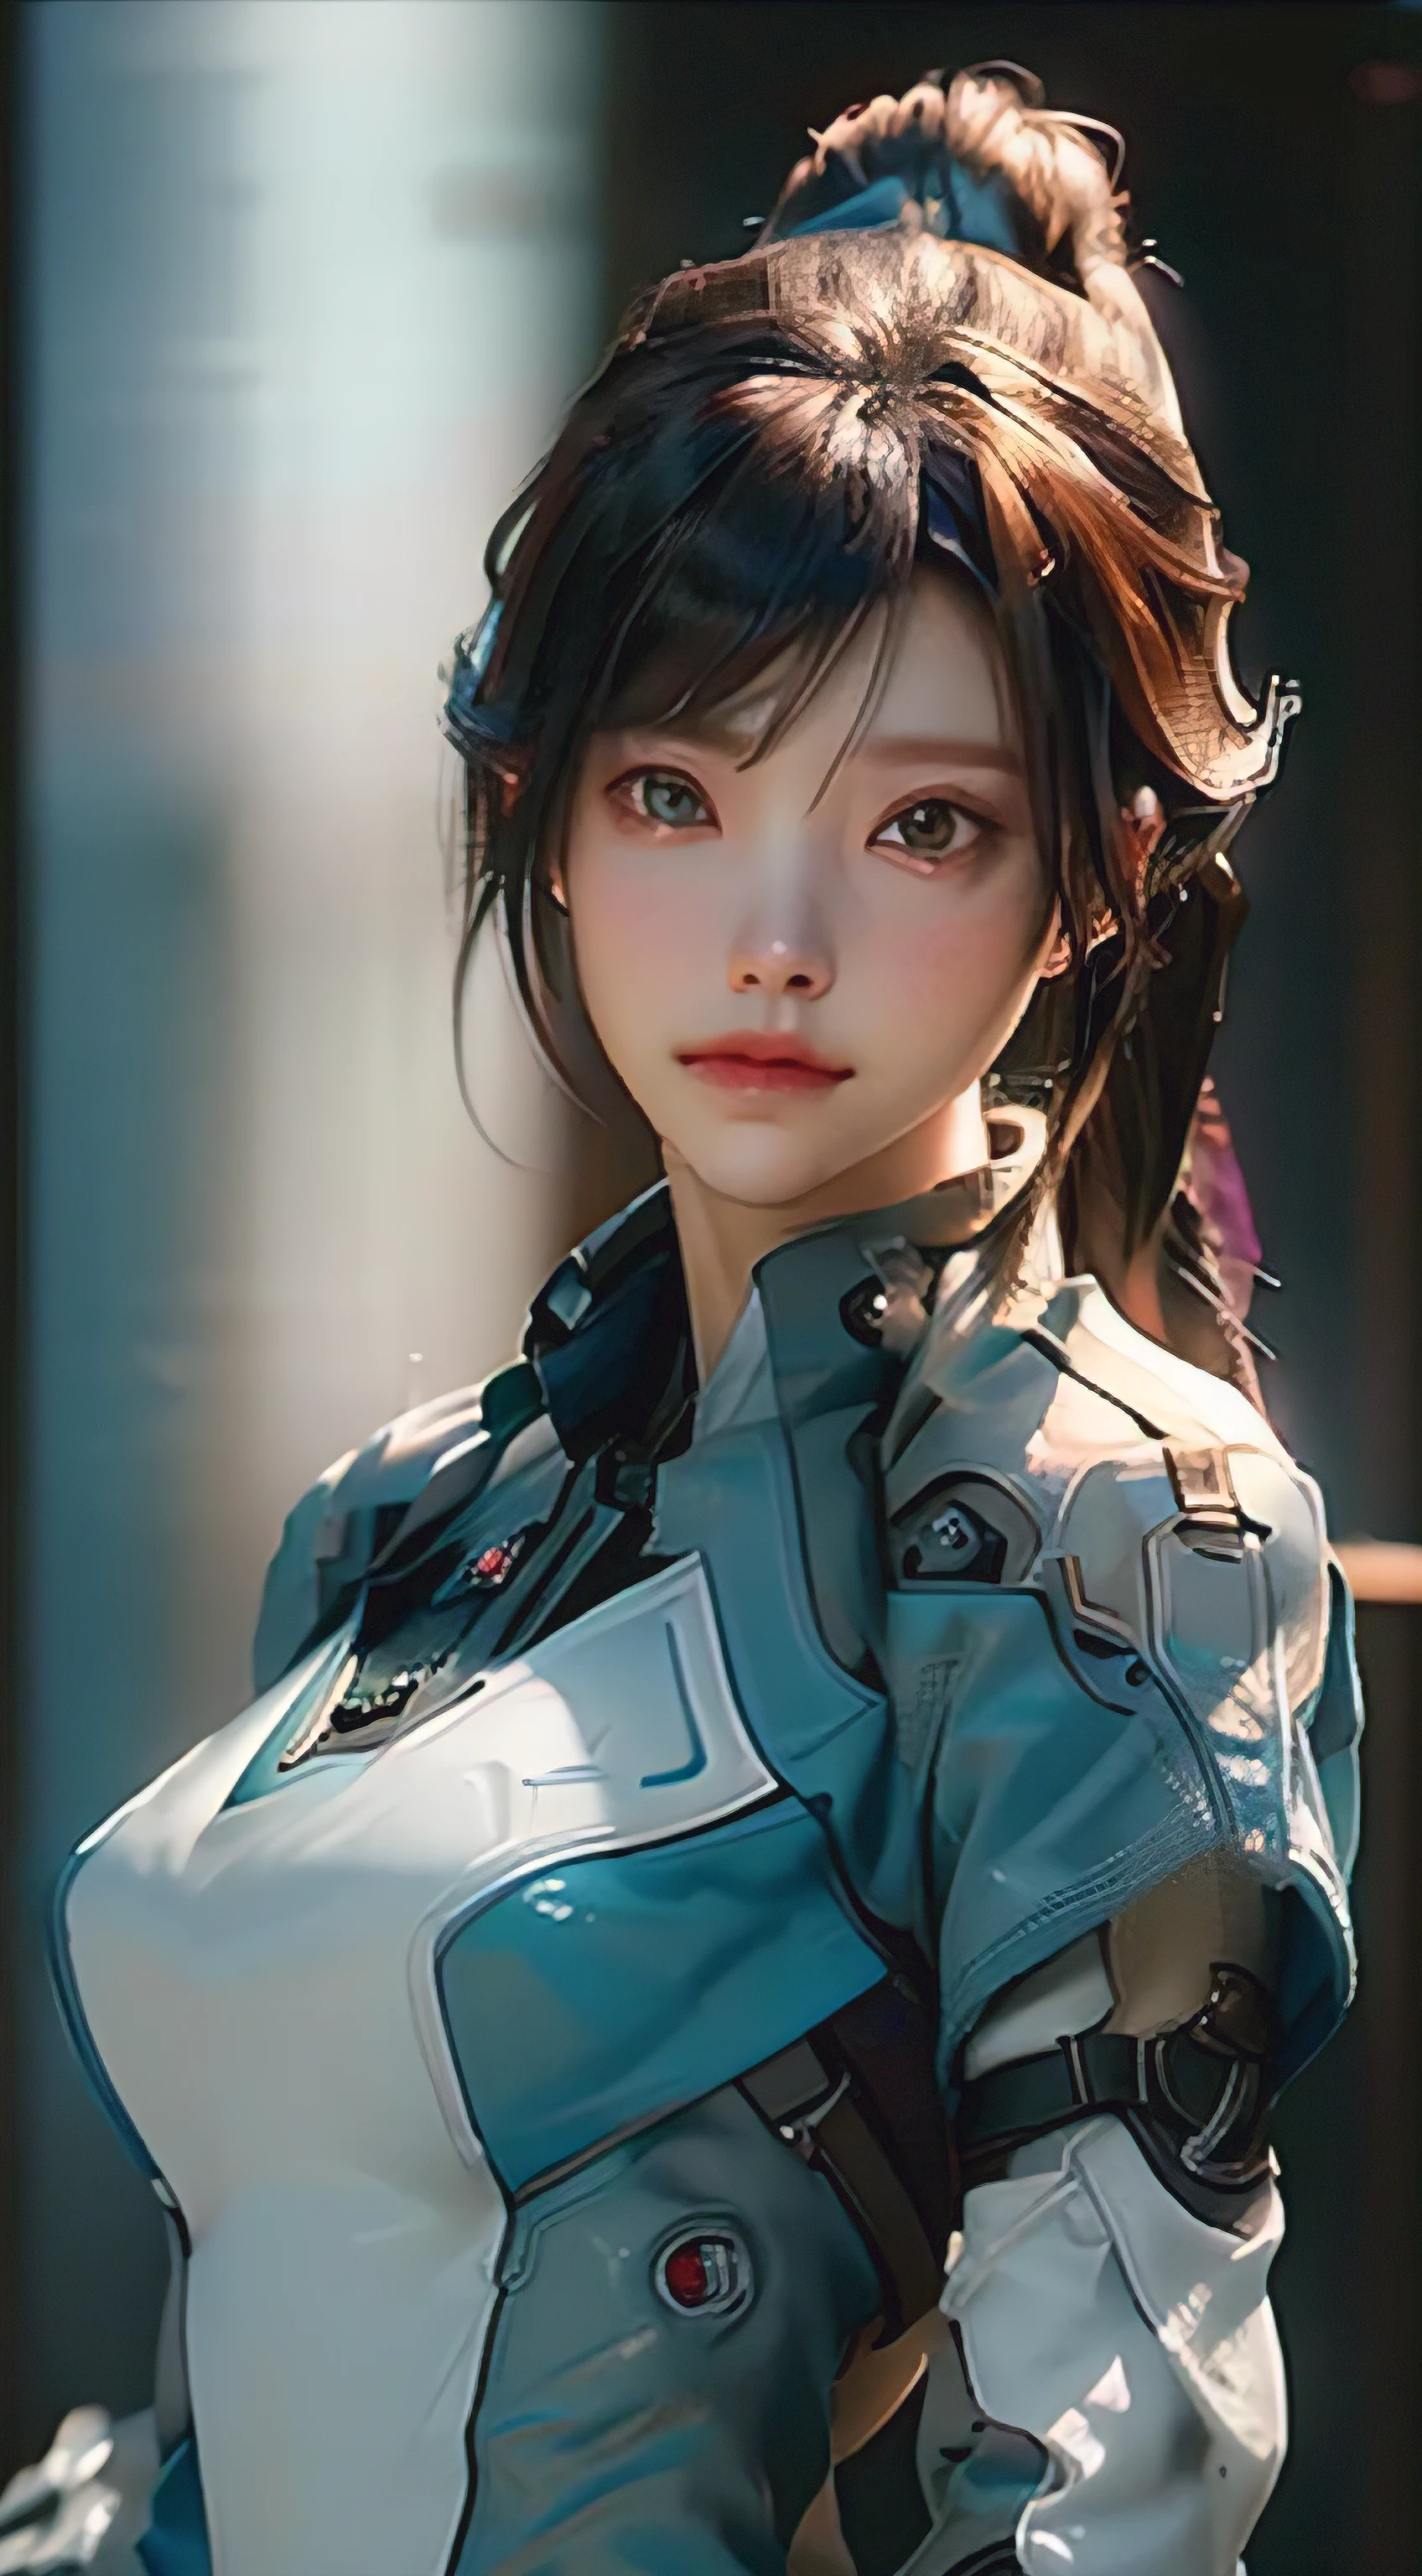 ((best quality)), ((masterpiece)), (detailed:1.4), 3D, Image of a beautiful cyberpunk woman,human development report (high dynamic range),Ray tracing,NVIDIA RTX,super resolution,Unreal 5,subsurface scattering,PBR texture,post processing,Anisotropic filtering,depth of field,Maximum clarity and sharpness,multi-layer texture,Albedo and specular maps,surface coloring,Accurate simulation of light-material interaction,Perfect proportion,octane rendering,Two-tone lighting,Large aperture,Low ISO,white balance,rule of thirds,8K original,